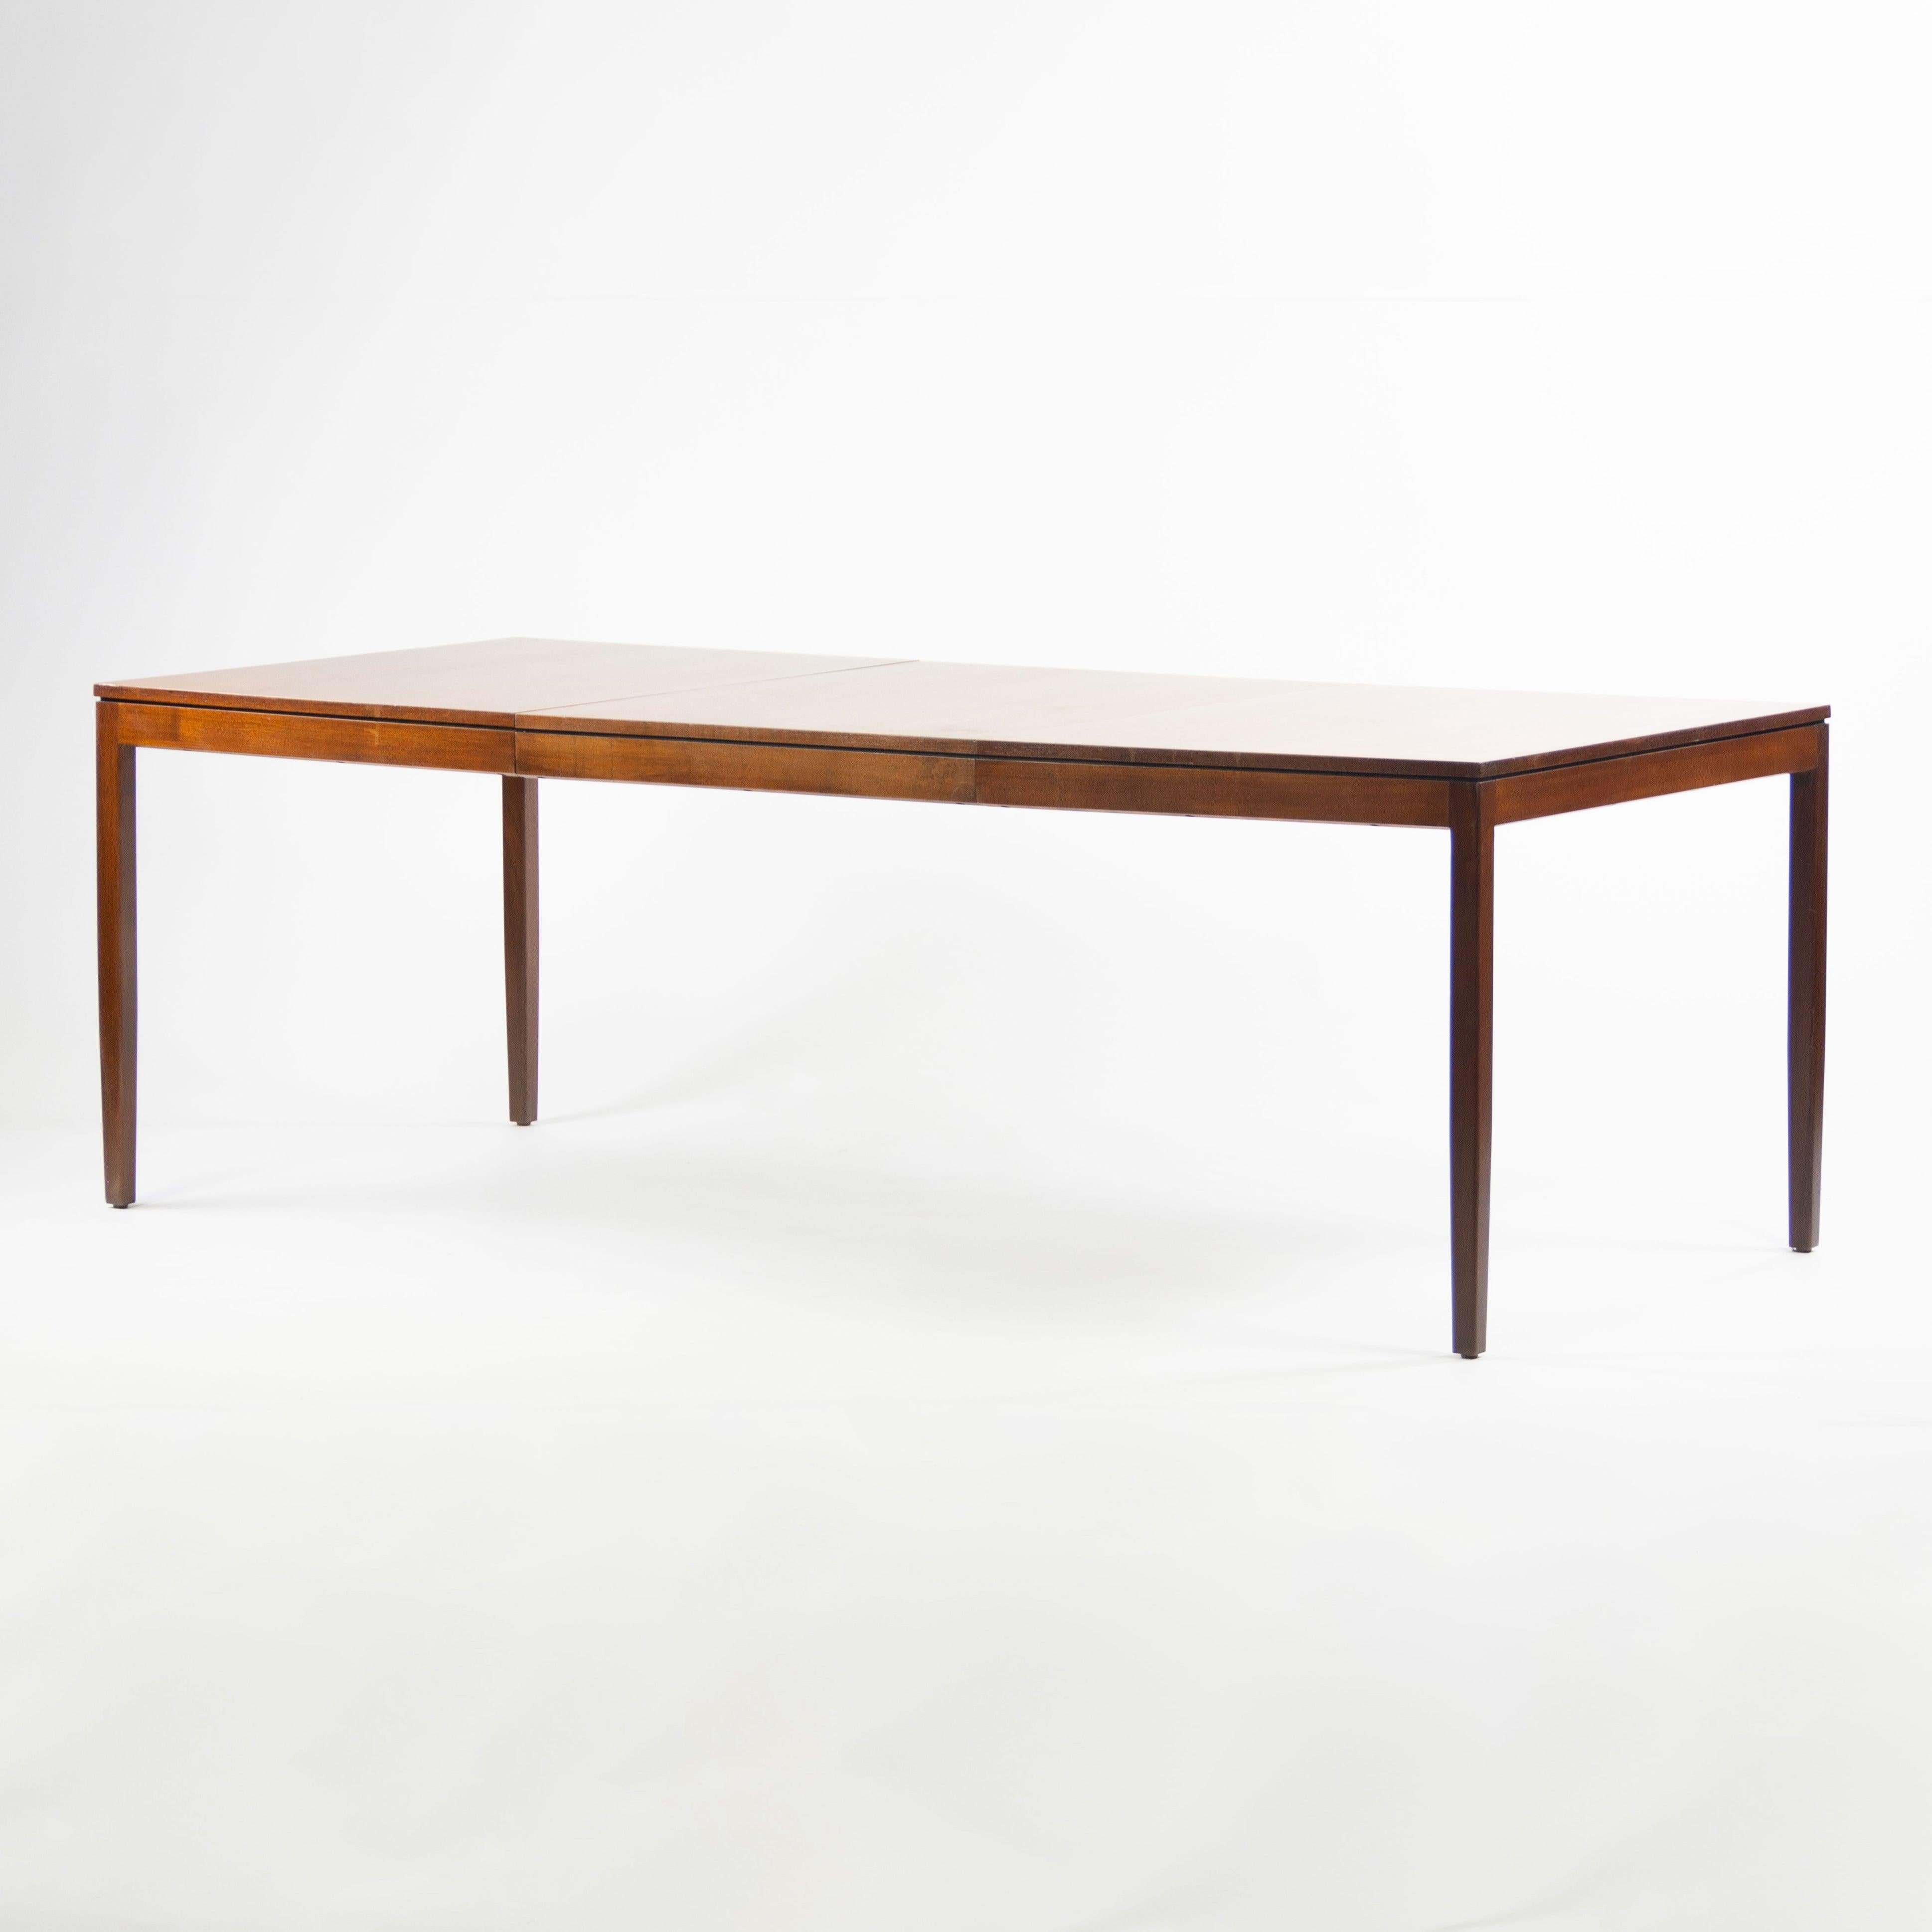 Listed for sale is a rare and stunning original Florence Knoll dining table in walnut. This example is a classic yet refined Florence Knoll piece, showcasing minimal lines and refined details.
The table includes one leaf, measuring 56 inches without